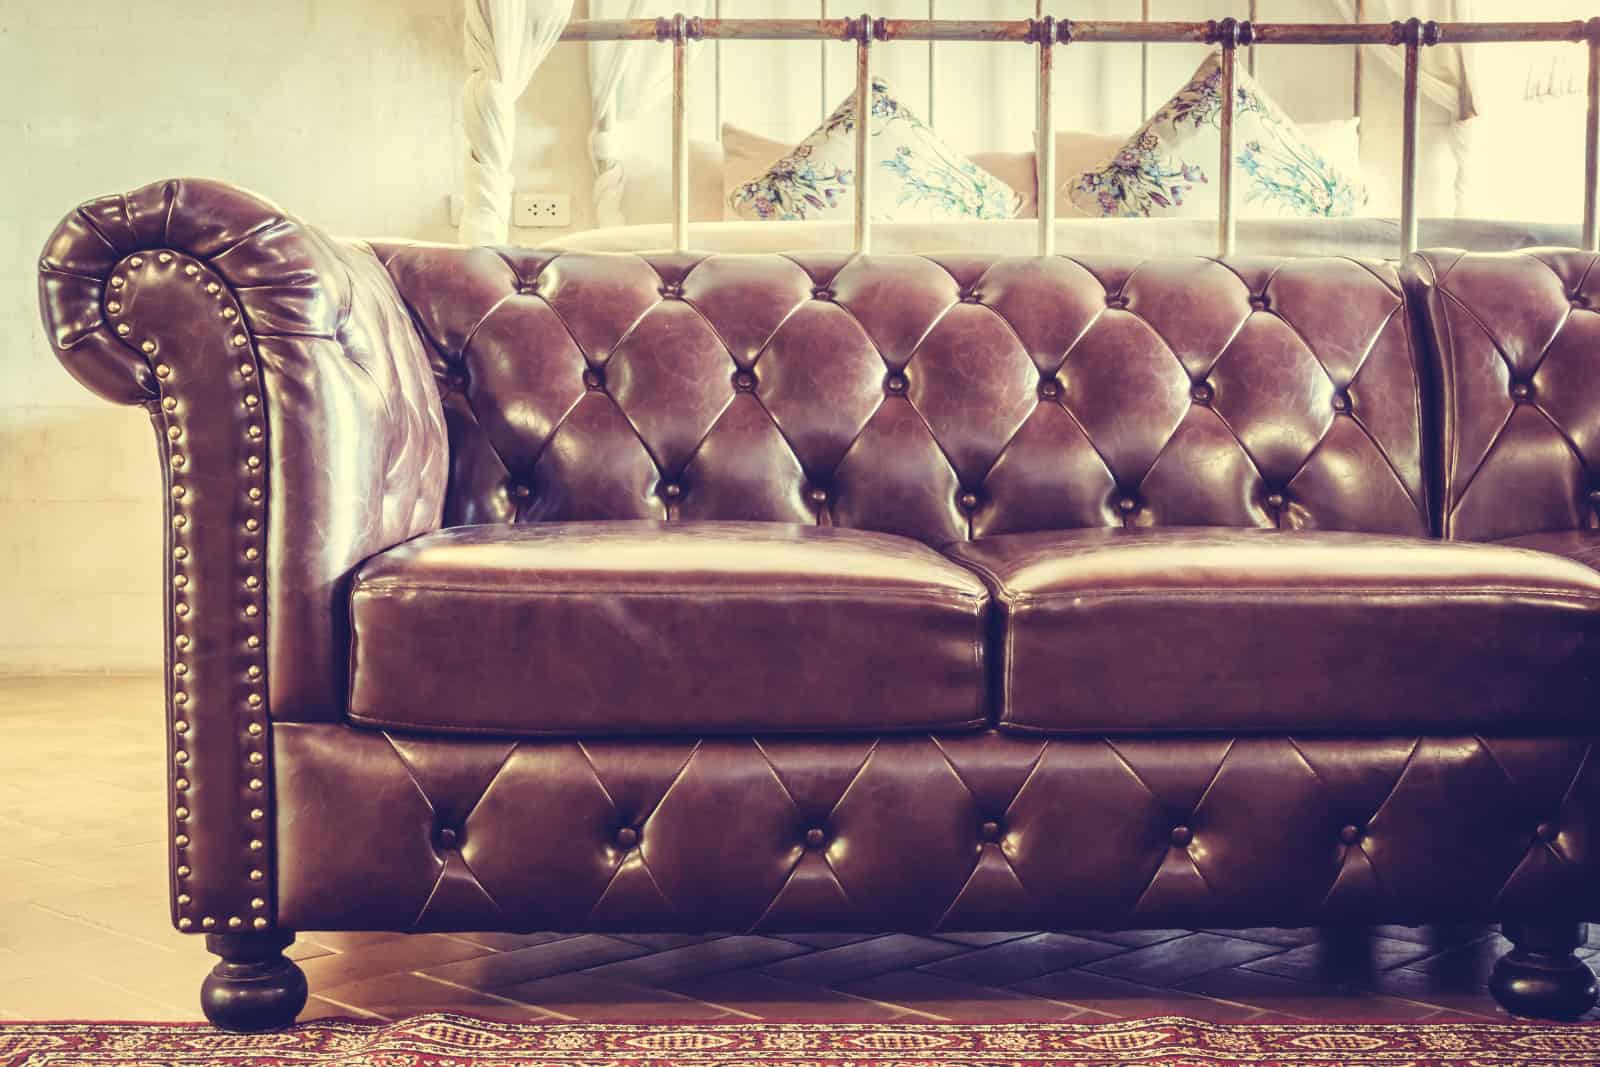 Top Leather Furniture Trends: How To Incorporate Leather Into Your Style